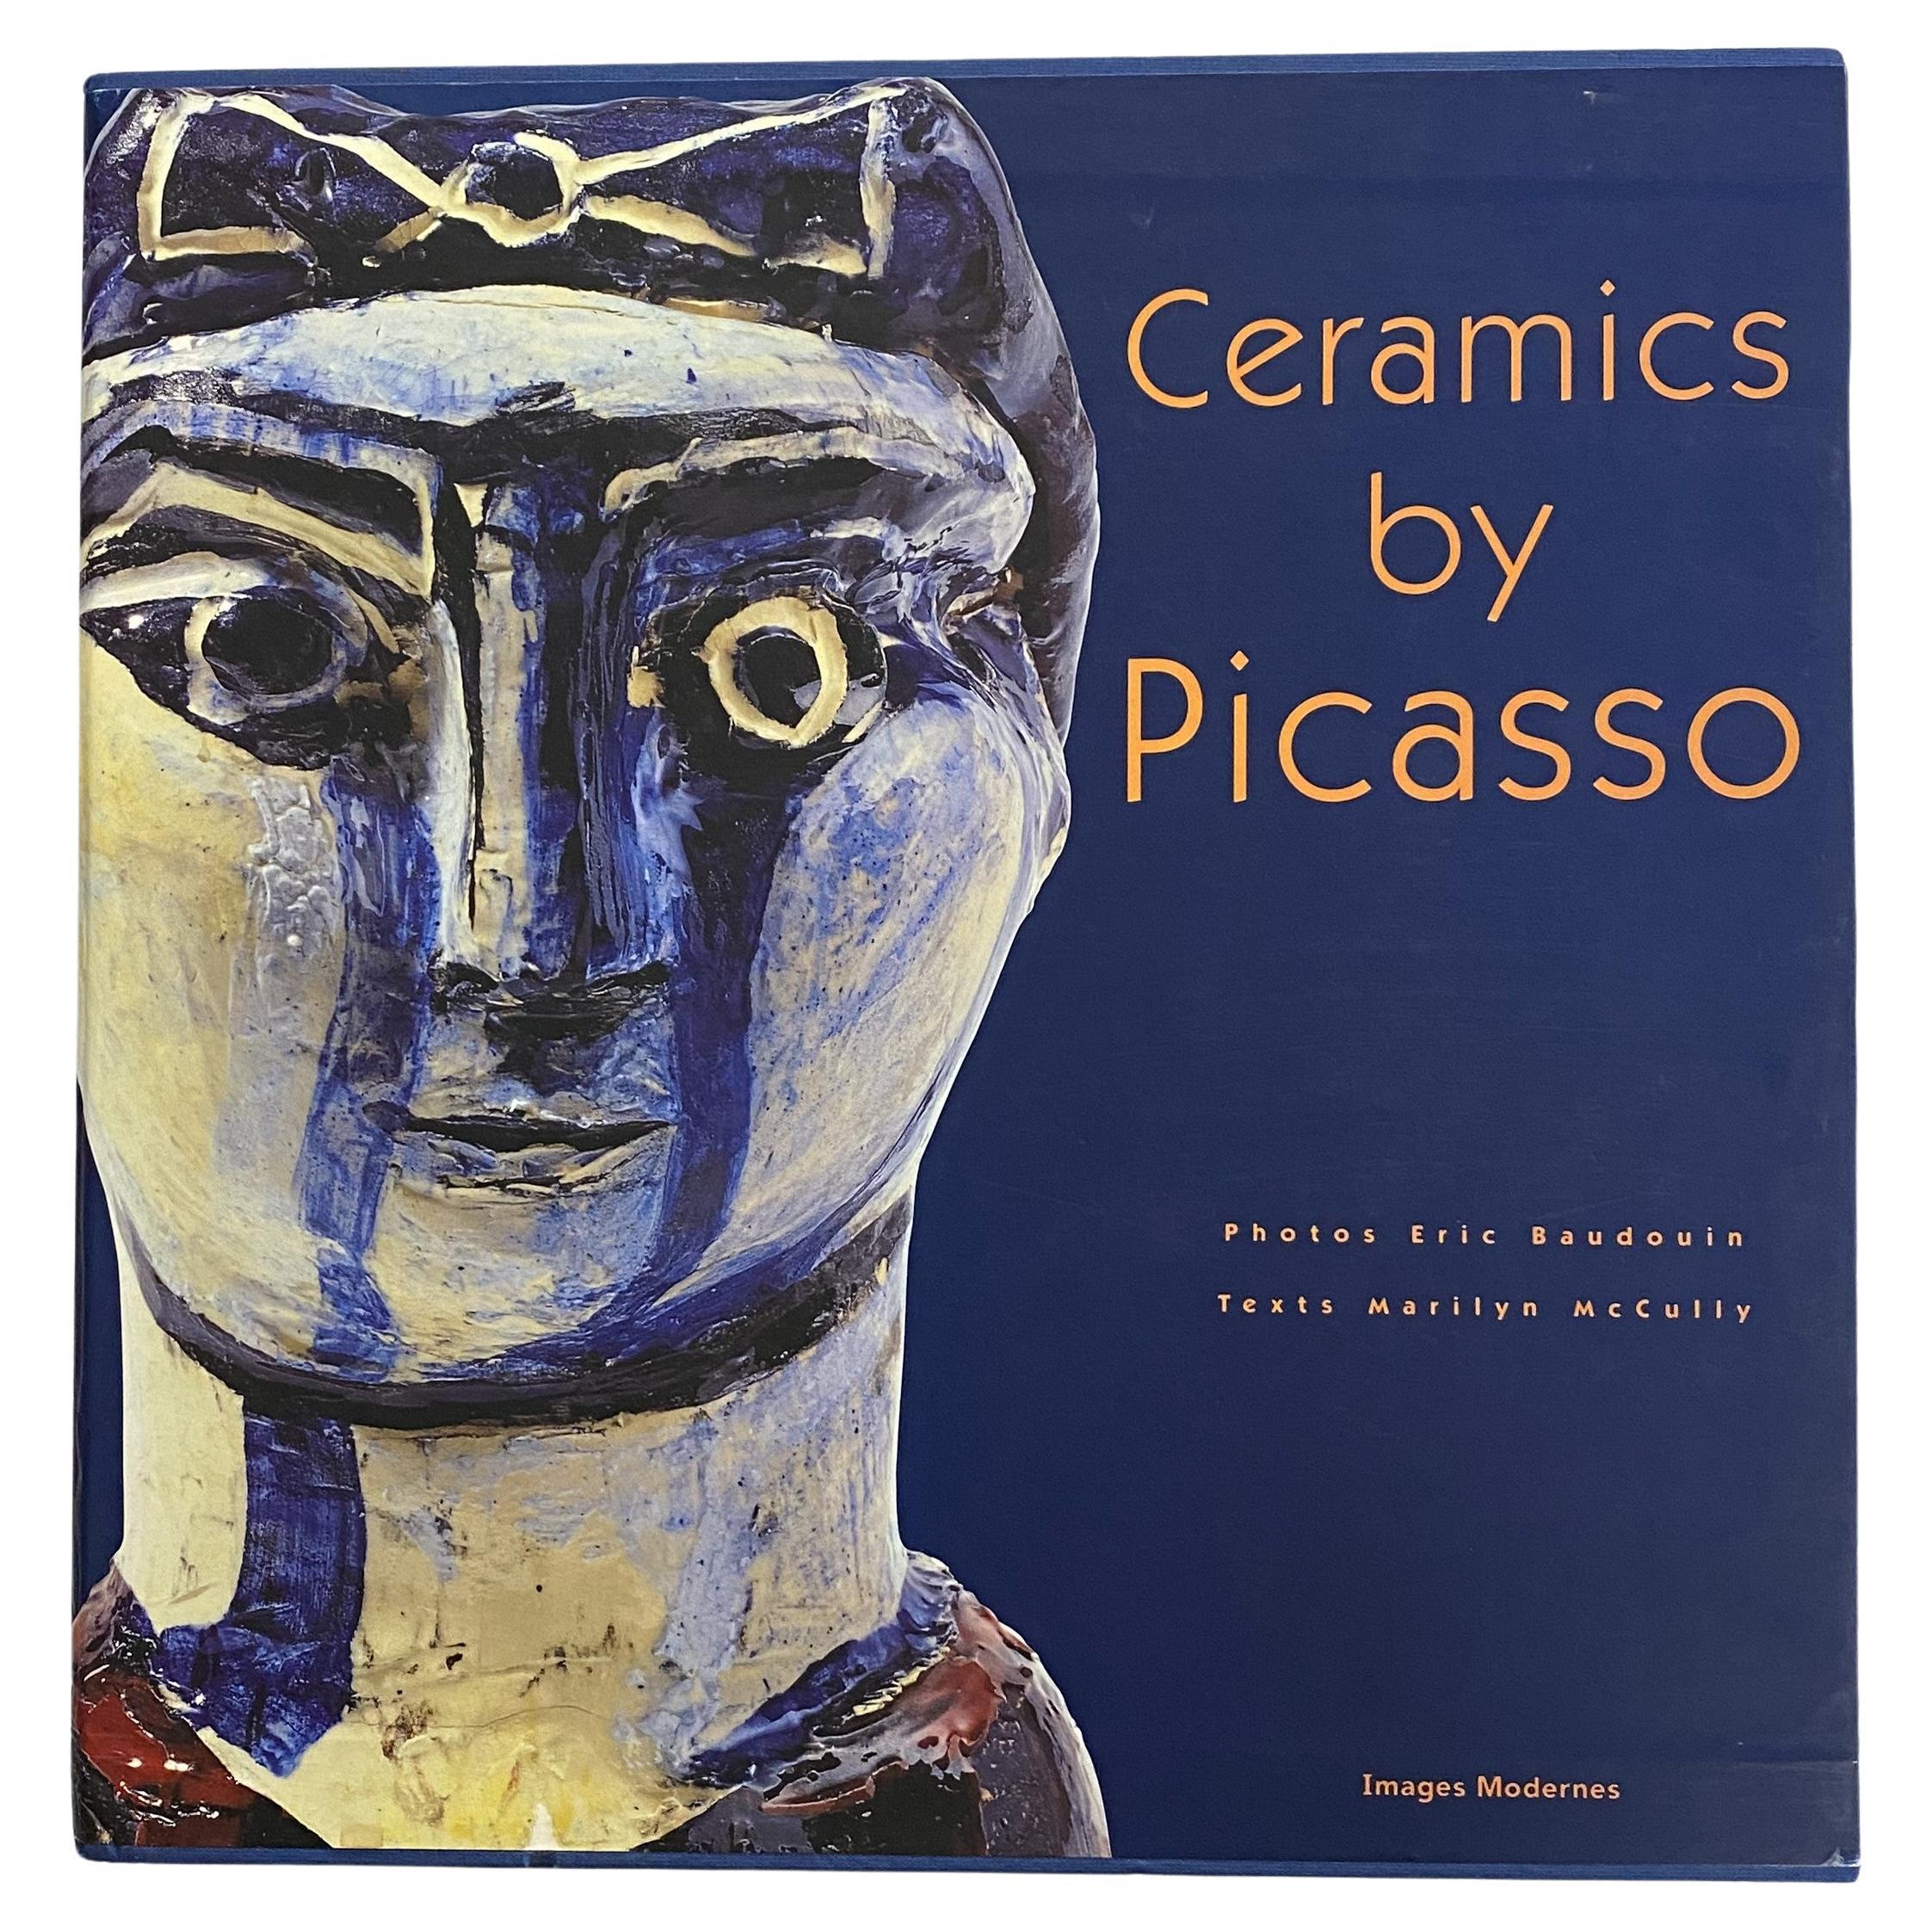 Ceramics by Picasso by Marilyn McCully (Book) For Sale